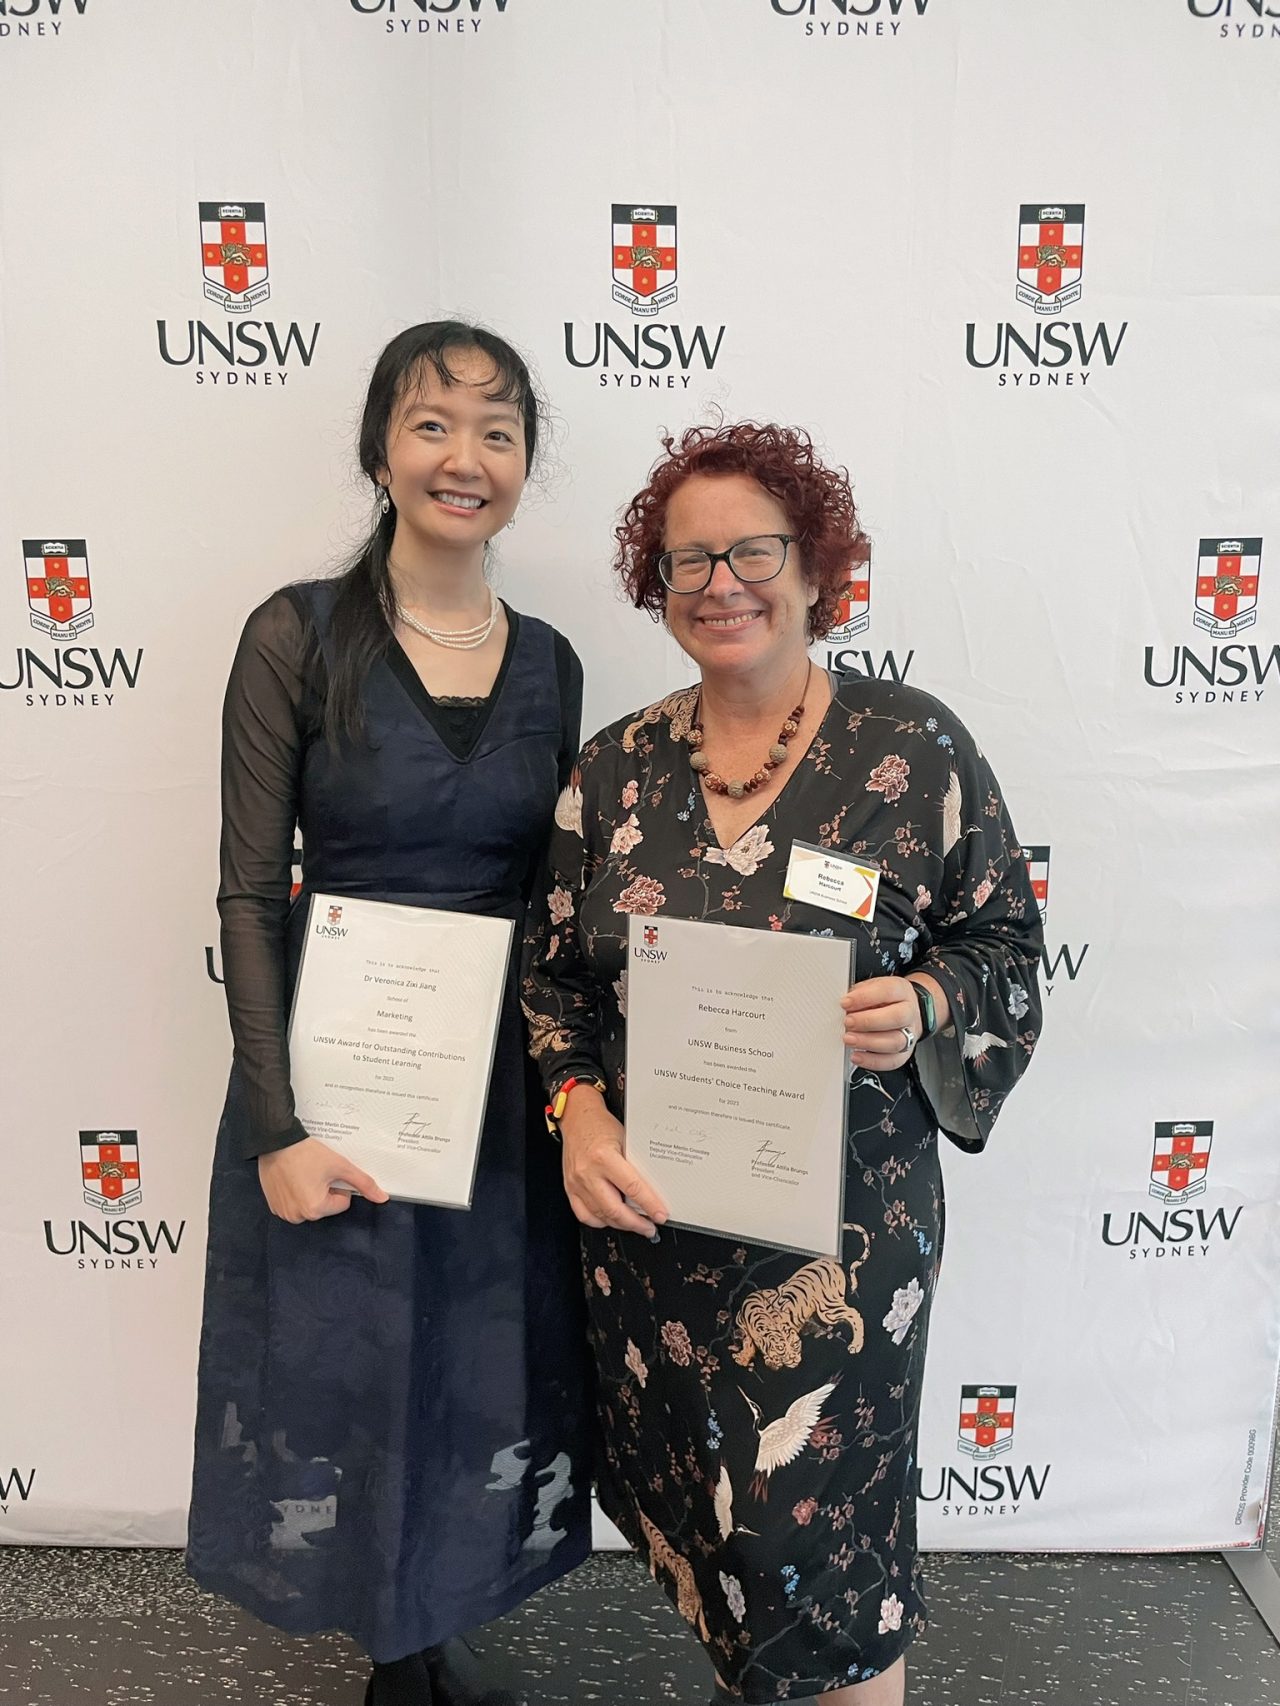 Left: Dr Veronica Jiang, School of Marketing, received the UNSW Award for Outstanding Contributions to Student Learning. Right: •	Rebecca Harcourt, Program Manager Indigenous Business, who received the UNSW Students' Choice Teaching Award.